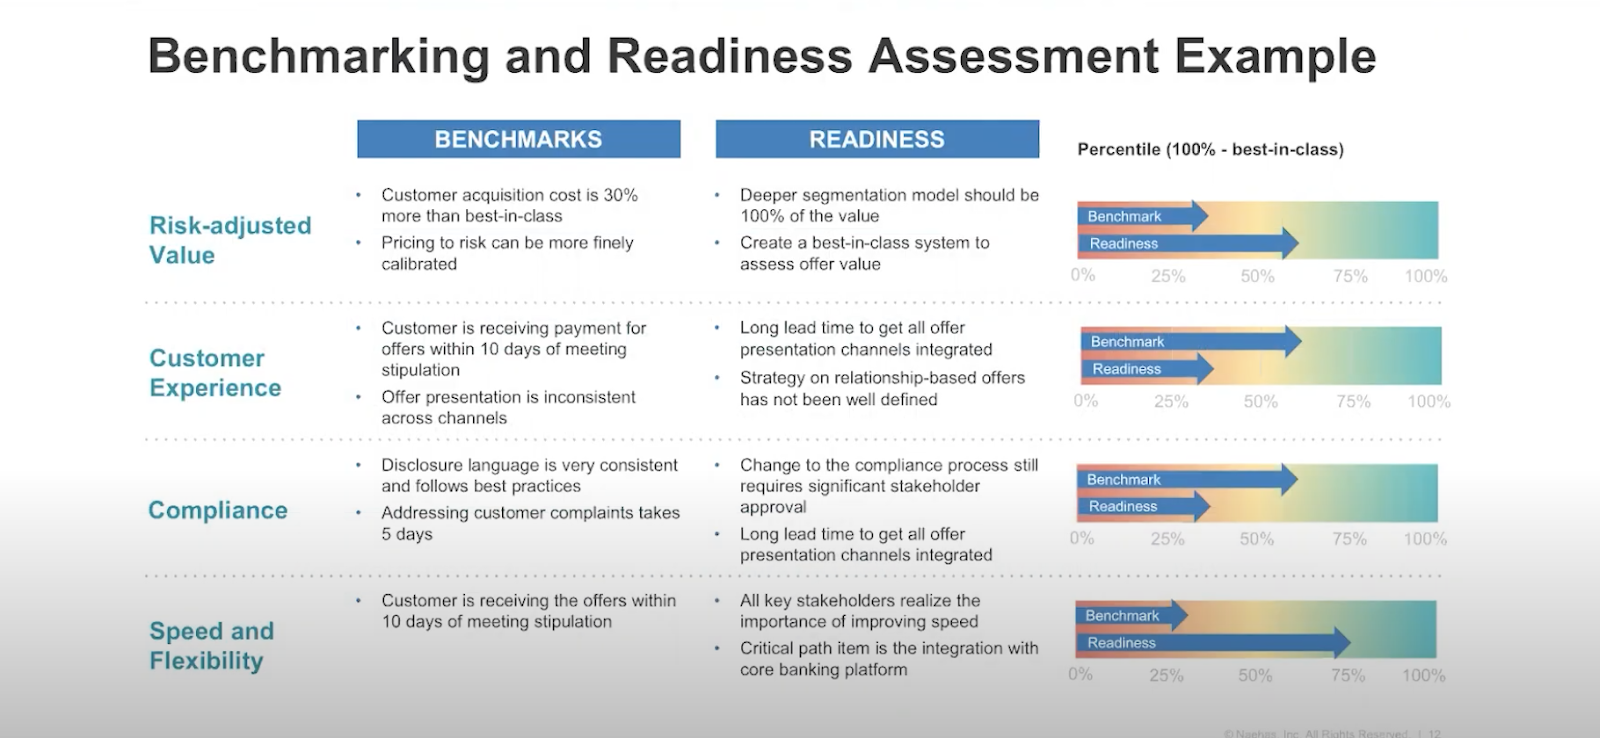 Benchmarking and Readiness Assessment Example